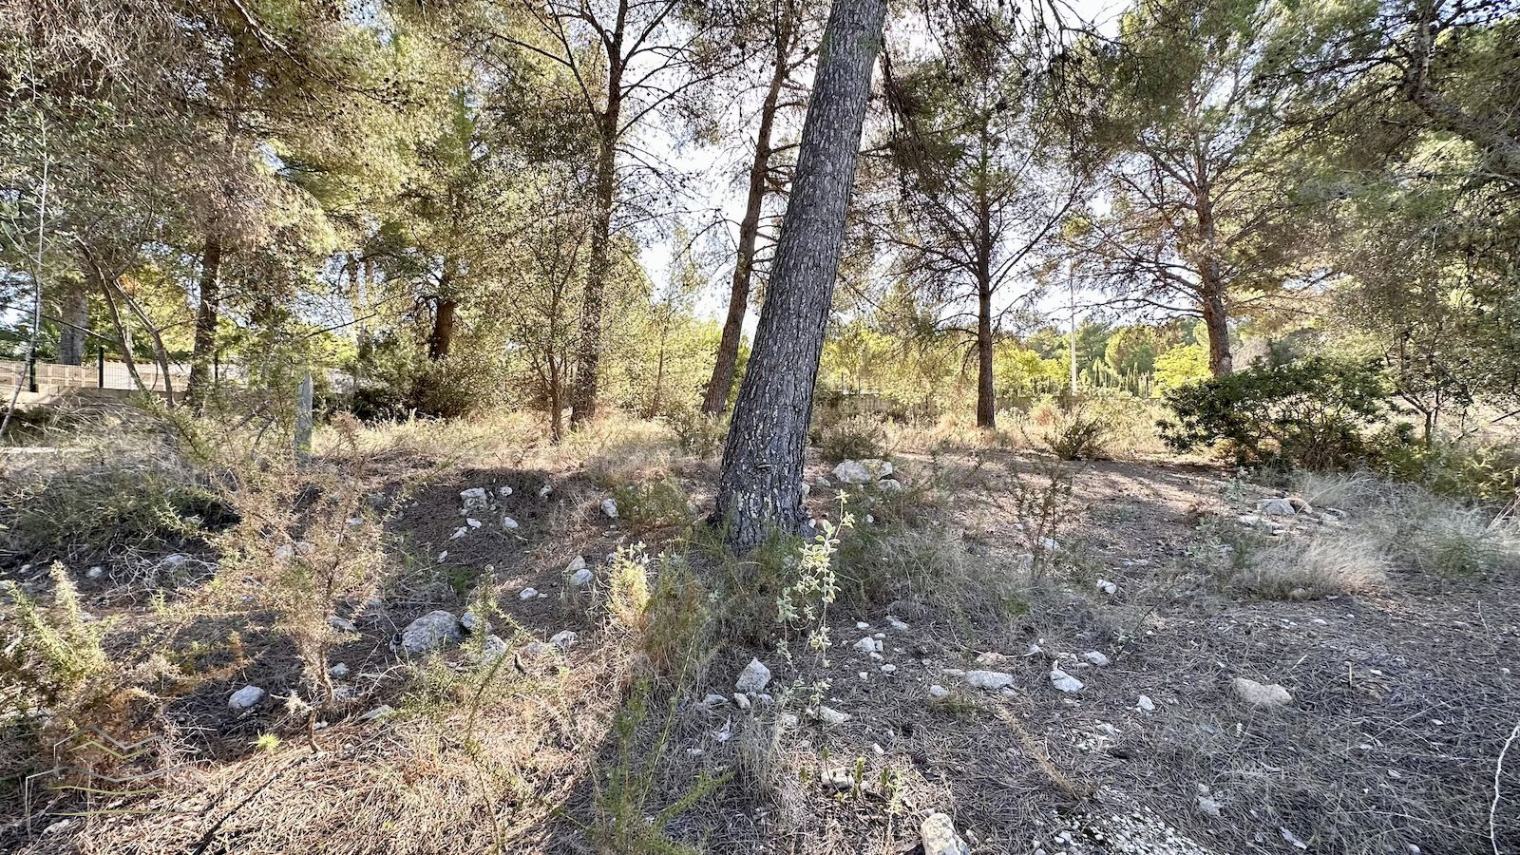 Plot for sale with building license - Javea